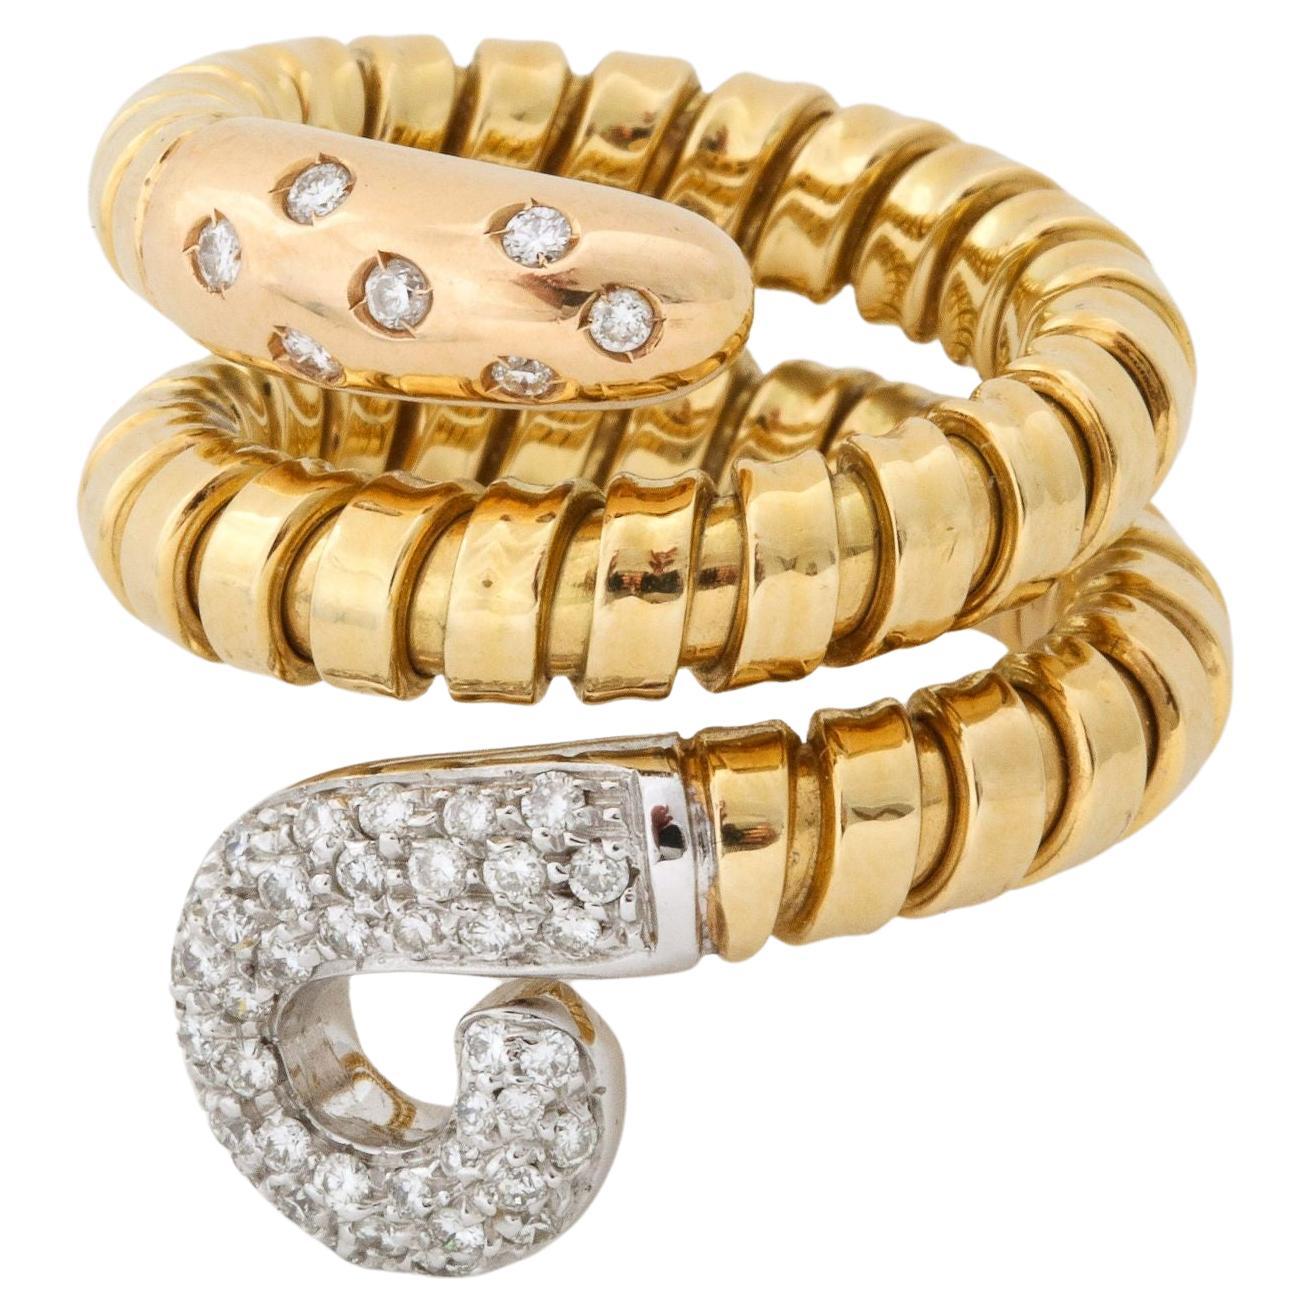  Gold Snake  Tubogas Ring With Diamond Head And Tail 18K